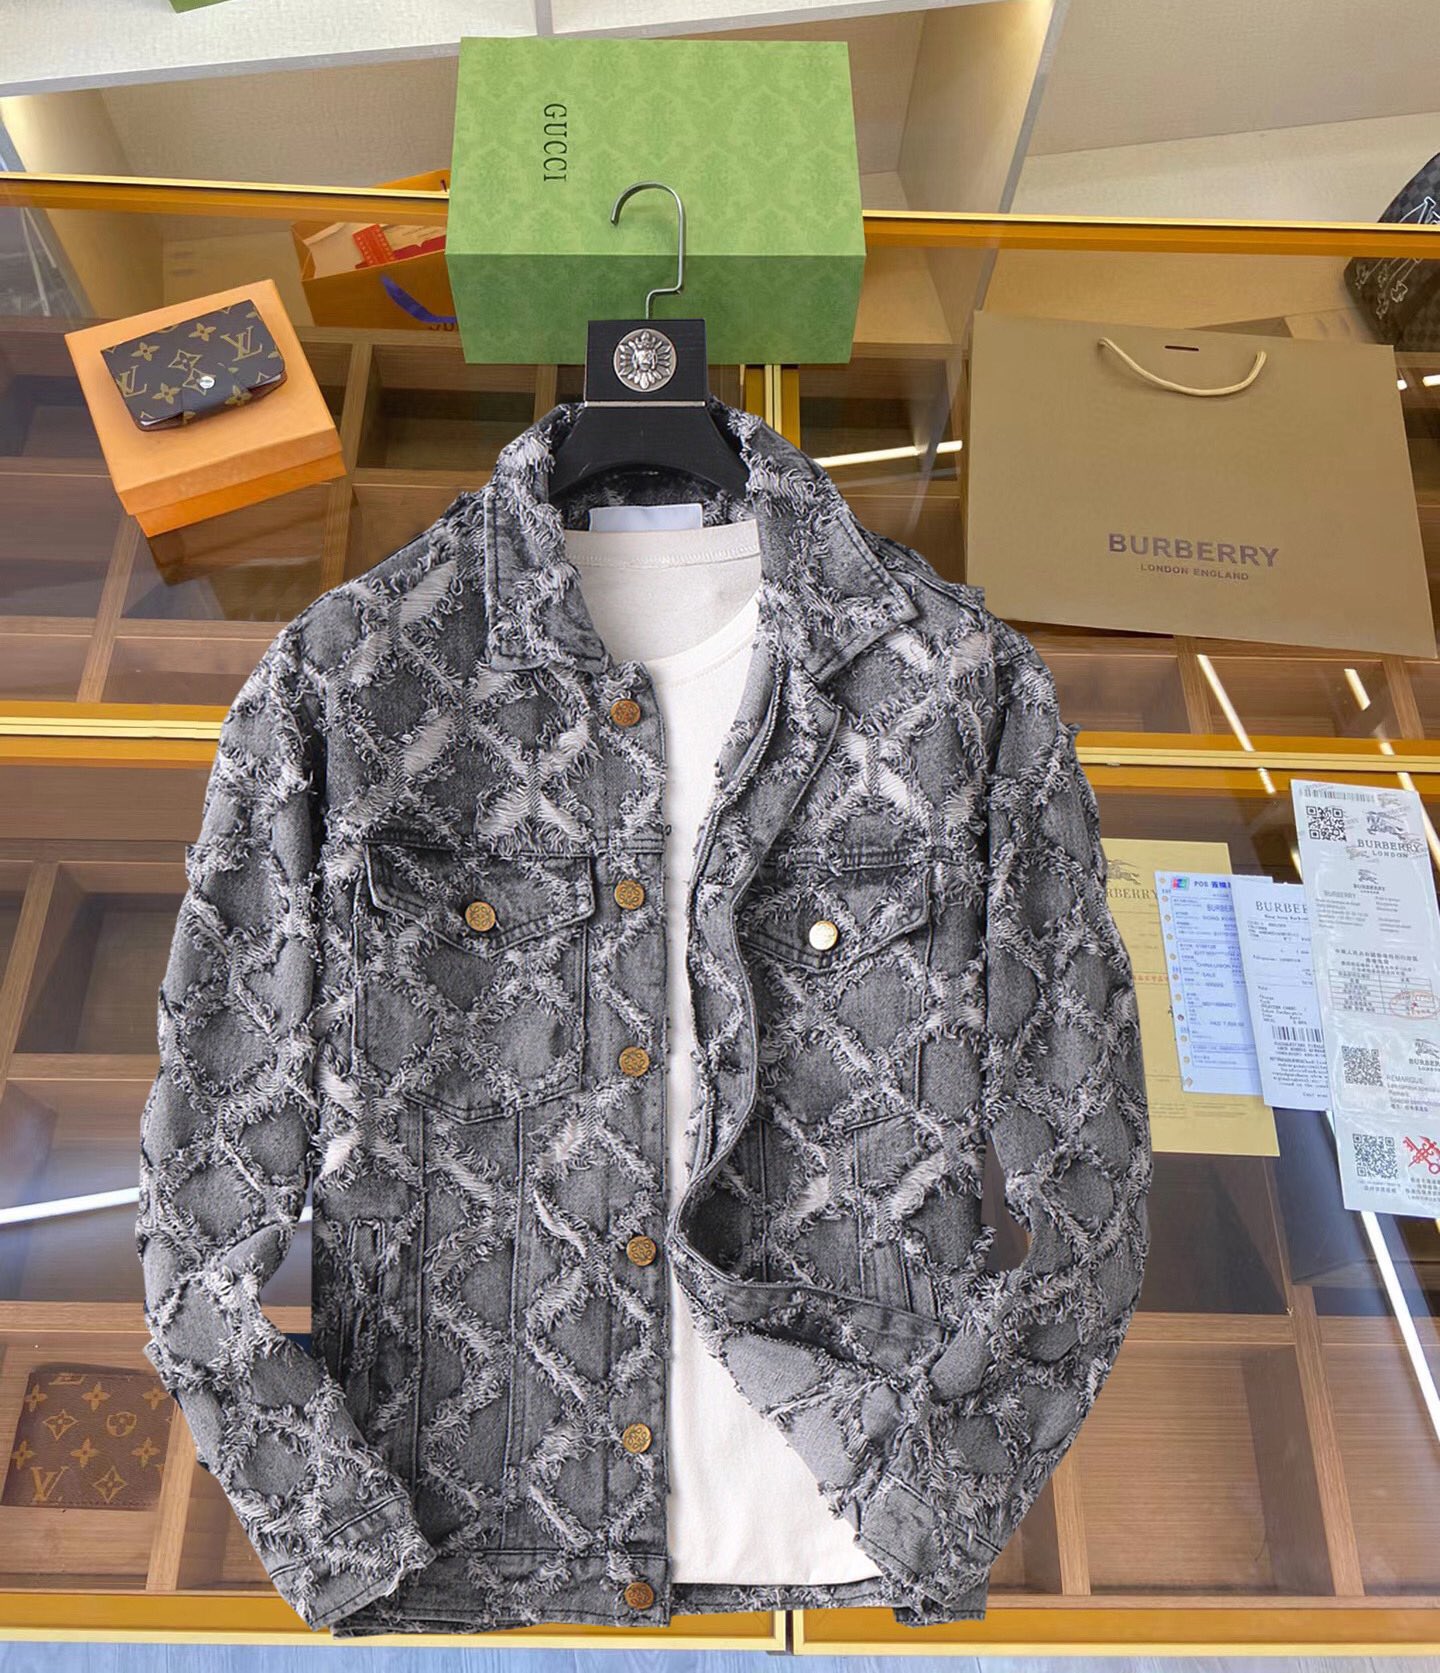 Loewe Clothing Coats & Jackets Printing Fall/Winter Collection Fashion